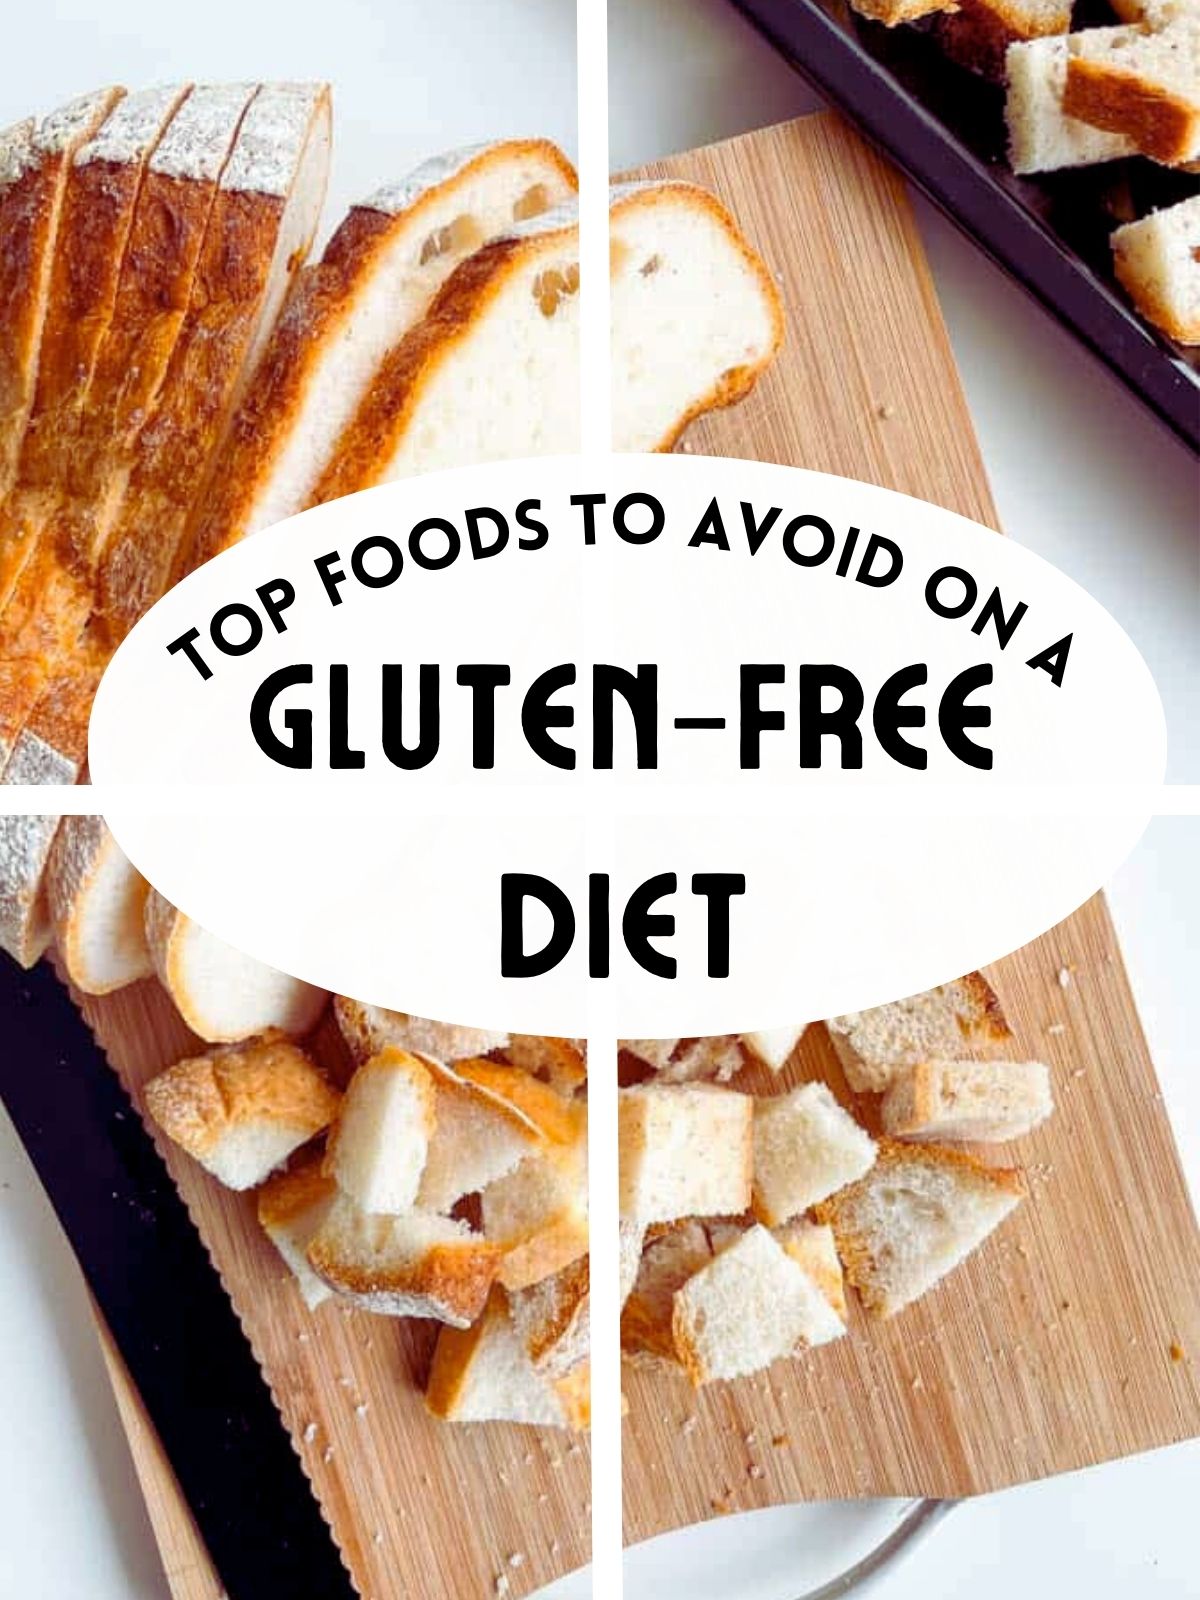 Top Foods To Avoid on a Gluten-Free Diet